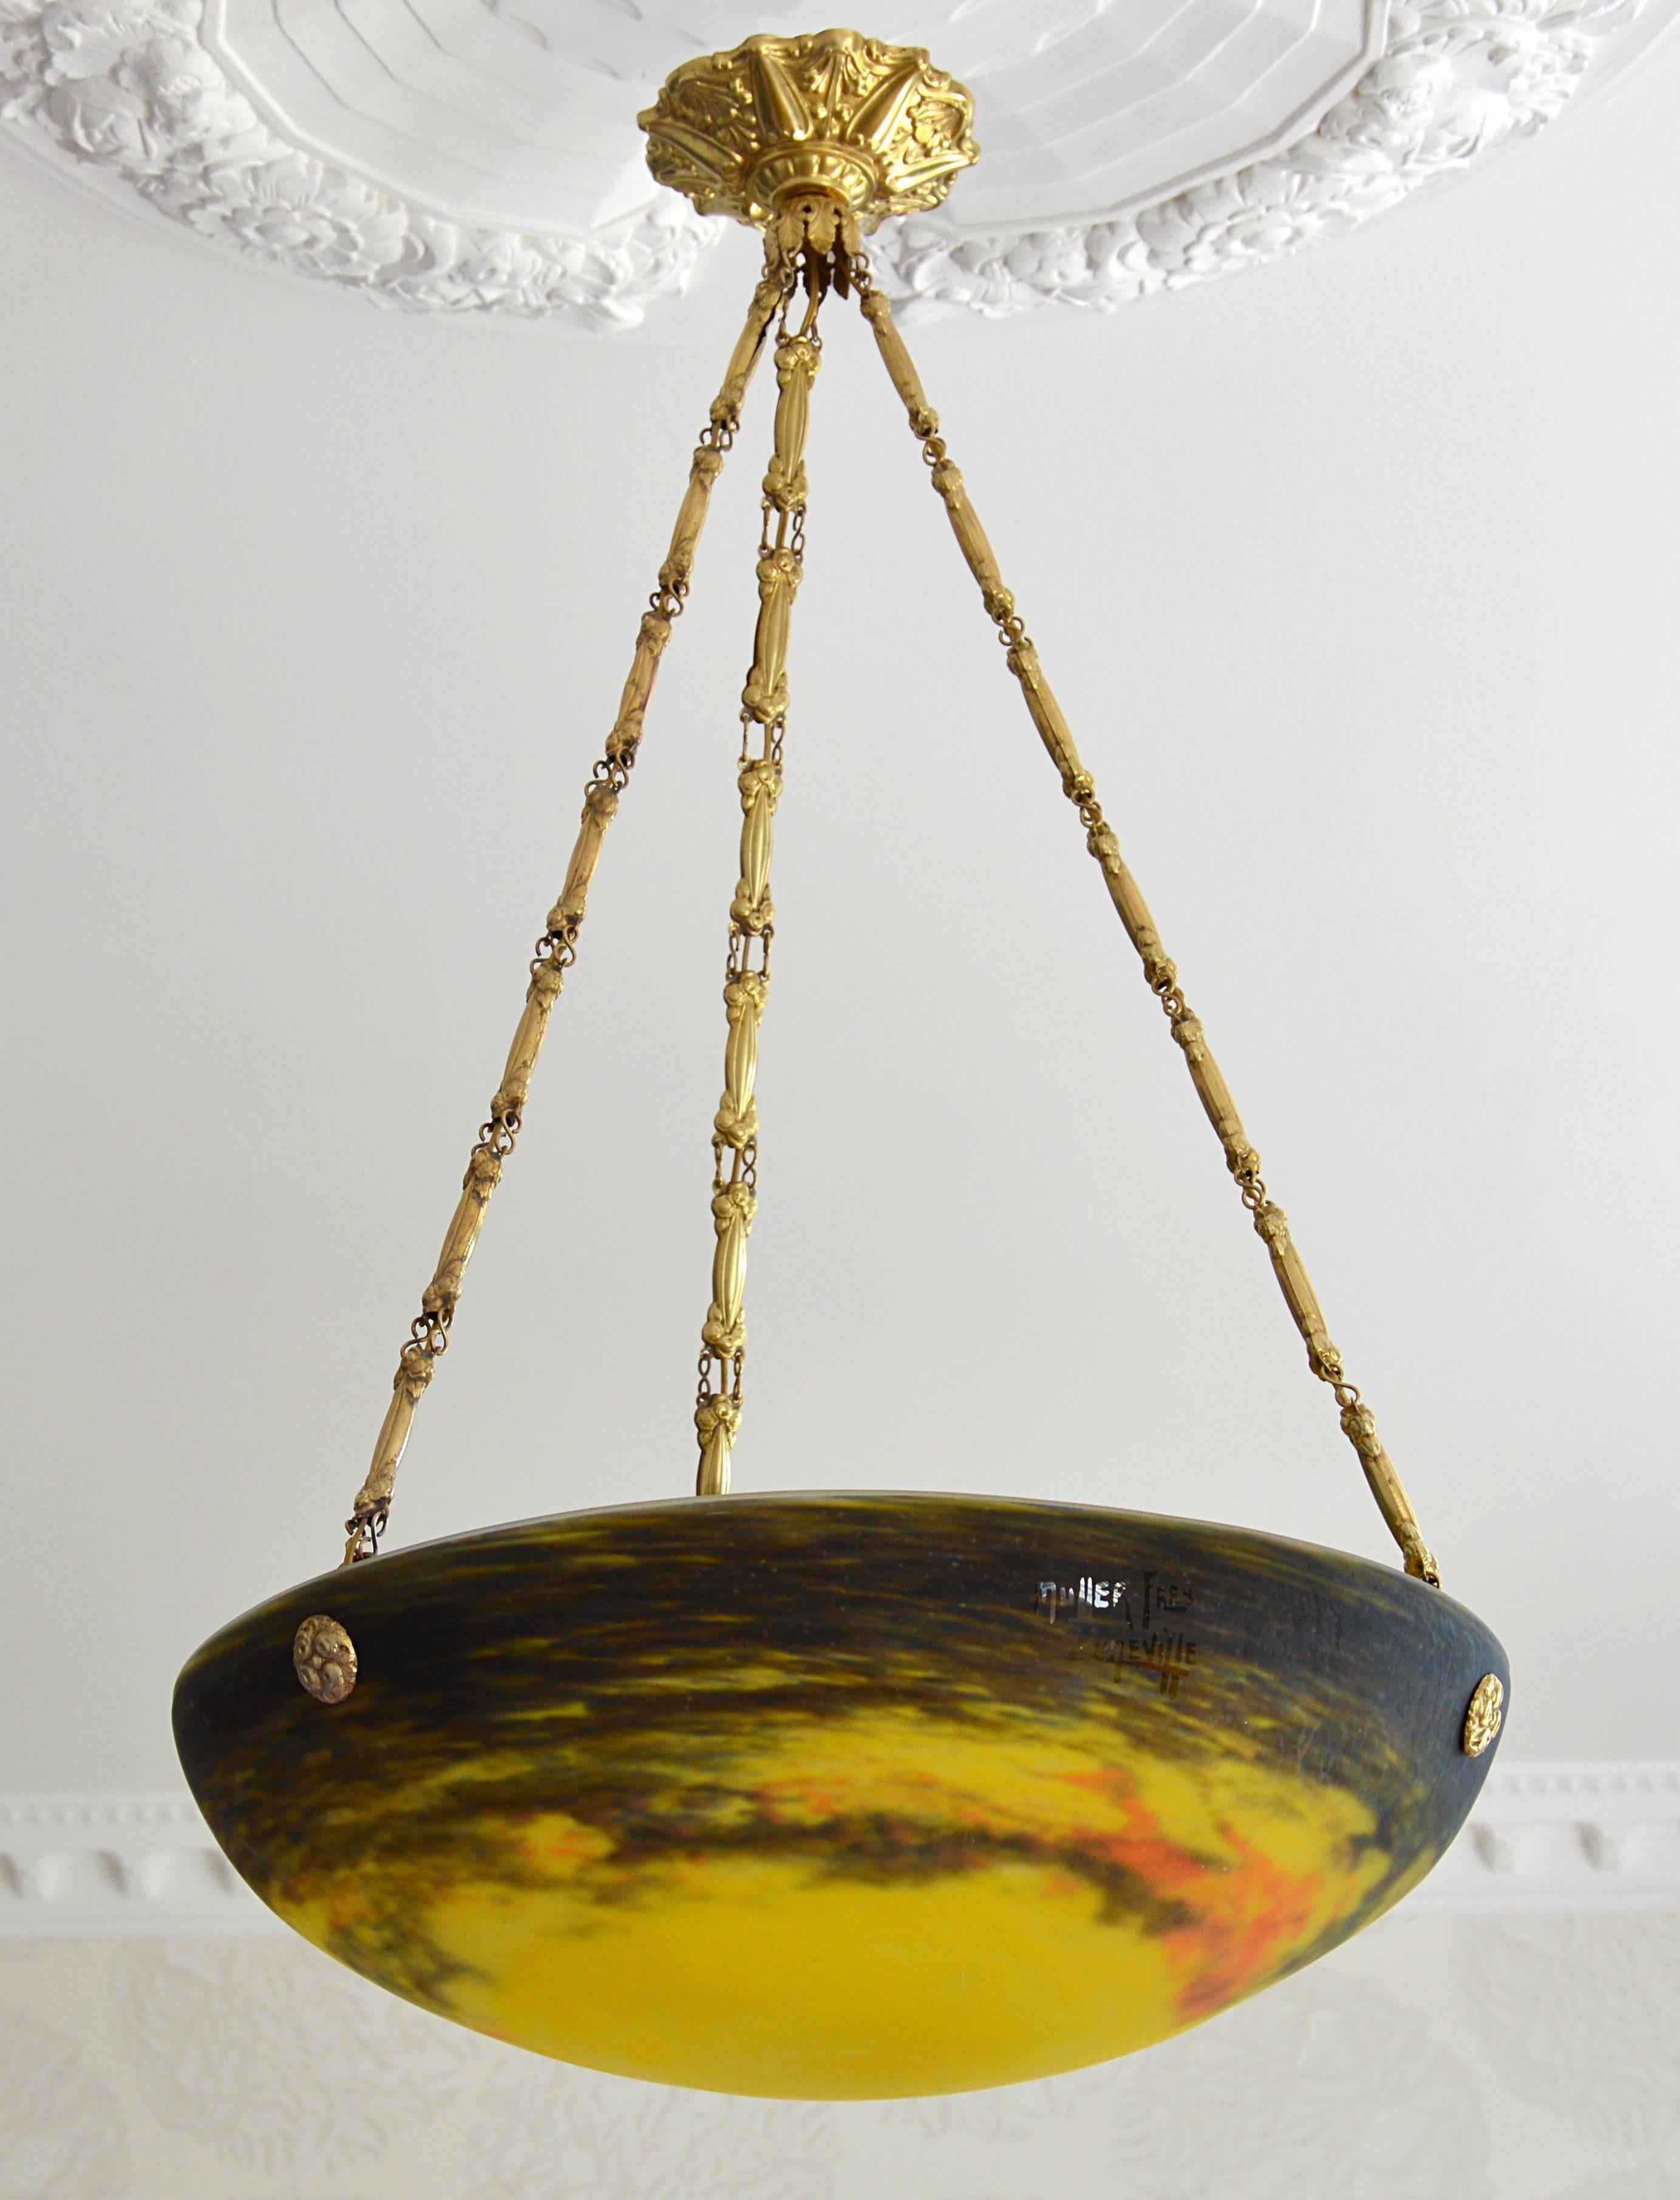 French Art Deco pendant by Muller Frères, Luneville, France, circa 1925. Mottled glass shade, powders are applied between two layers, that comes hung at its original brass fixture. Measure: Height 26